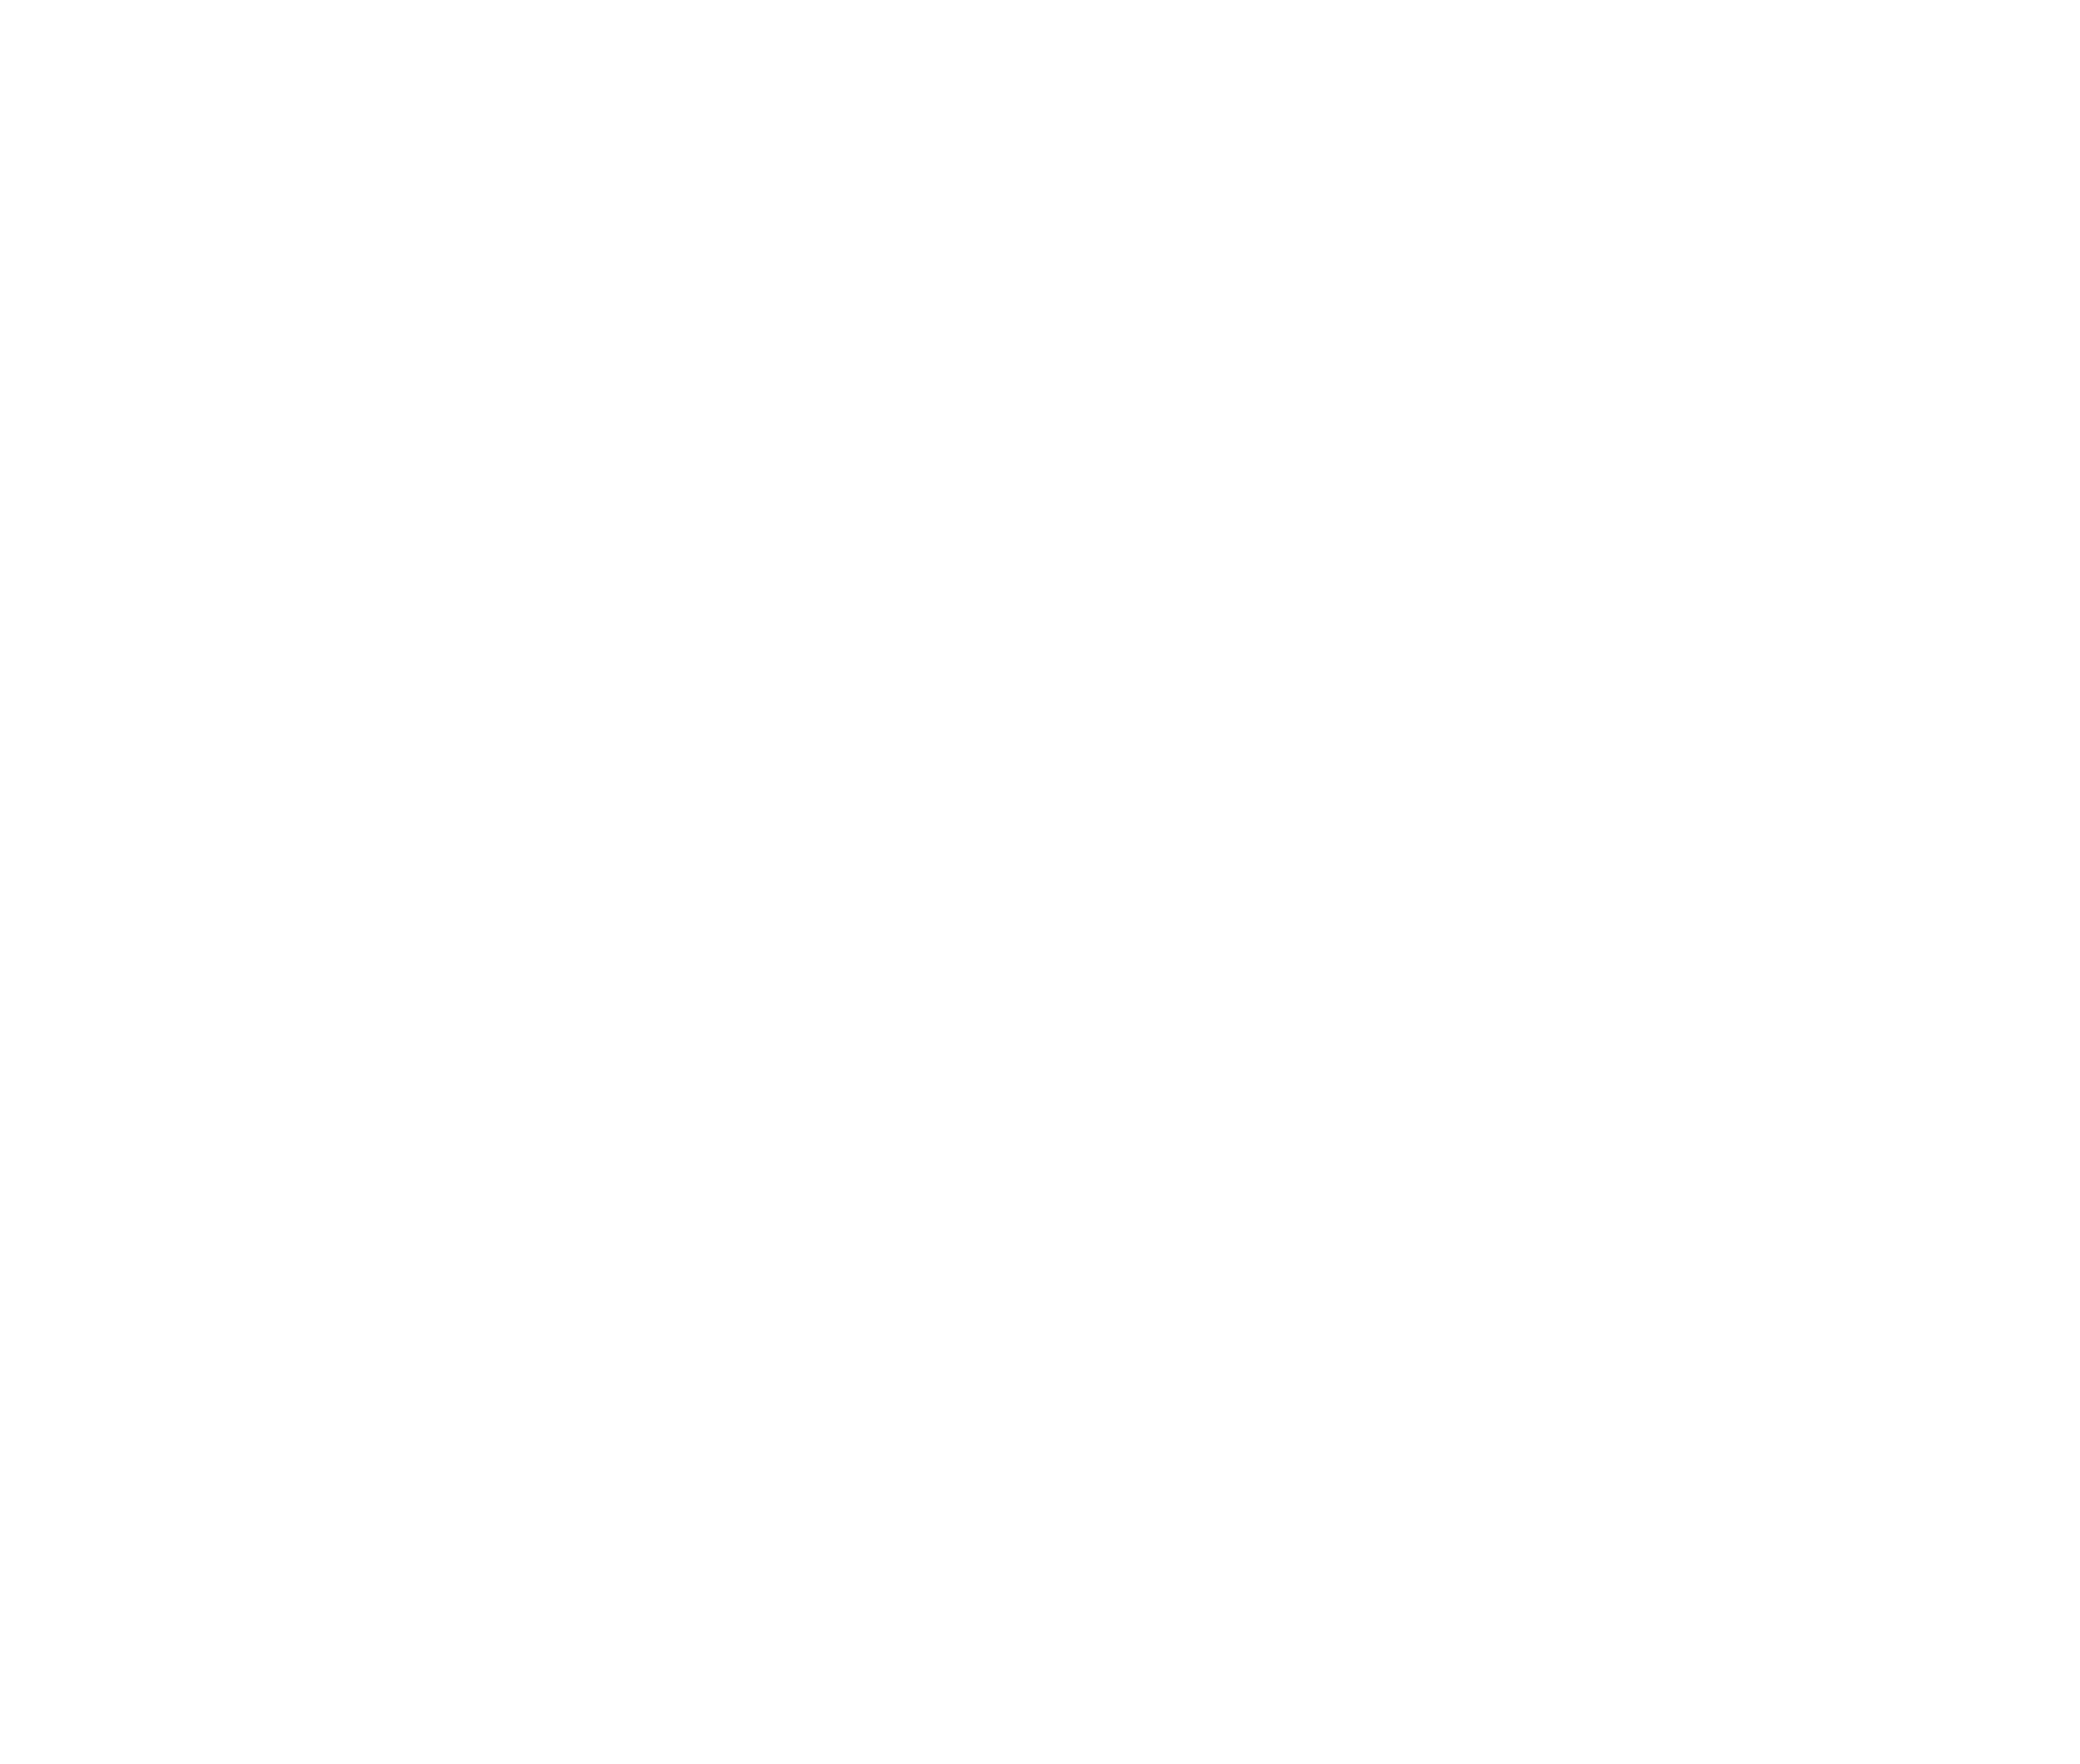 In Support of The Children's Hospital Charity